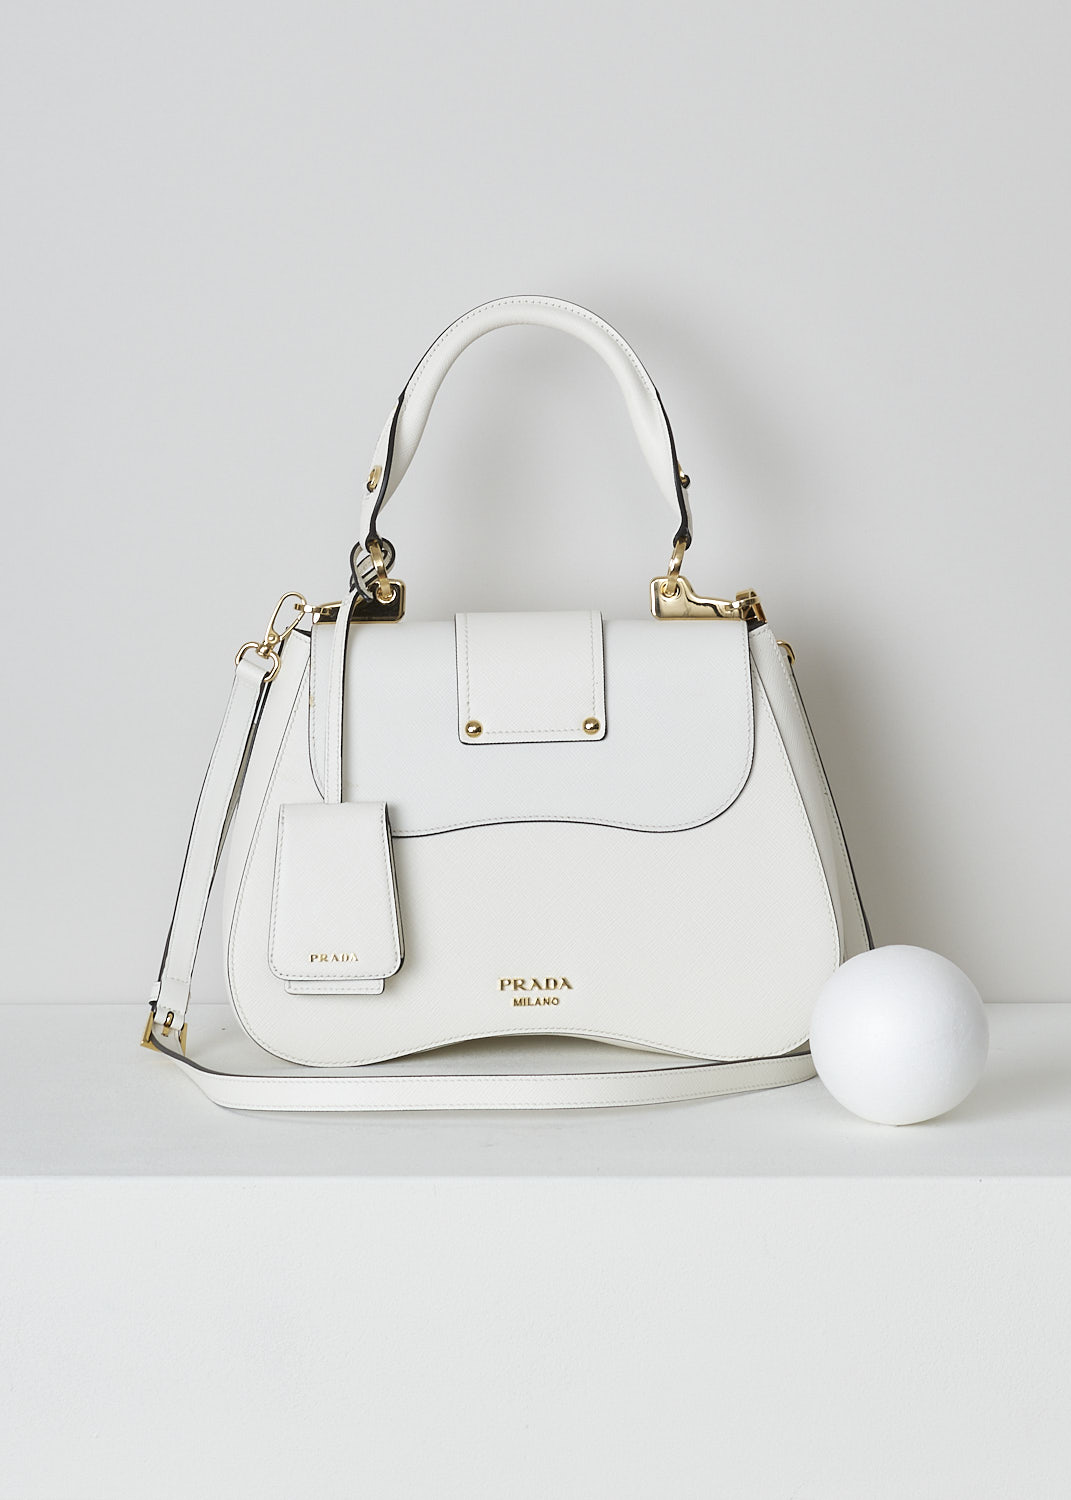 PRADA, MEDIUM SIDONIE TOP HANDLE BAG IN WHITE, CARTELLA_1BN005_F0009_BIANCO, White, Back, This mid-sized white Sidonie Top Handle Bag is made with Saffiano leather. The bag comes with a leather handle and an adjustable and detachable shoulder strap. The bag has gold-tone metal hardware with the brand's logo on the back. The removable leather keychain has that same gold-tone logo on it. The slip-through closure opens up to reveal its black interior. The bag has a single, spacious compartment with a zipped inner pocket to one side and a patch pocket on the other side.  
